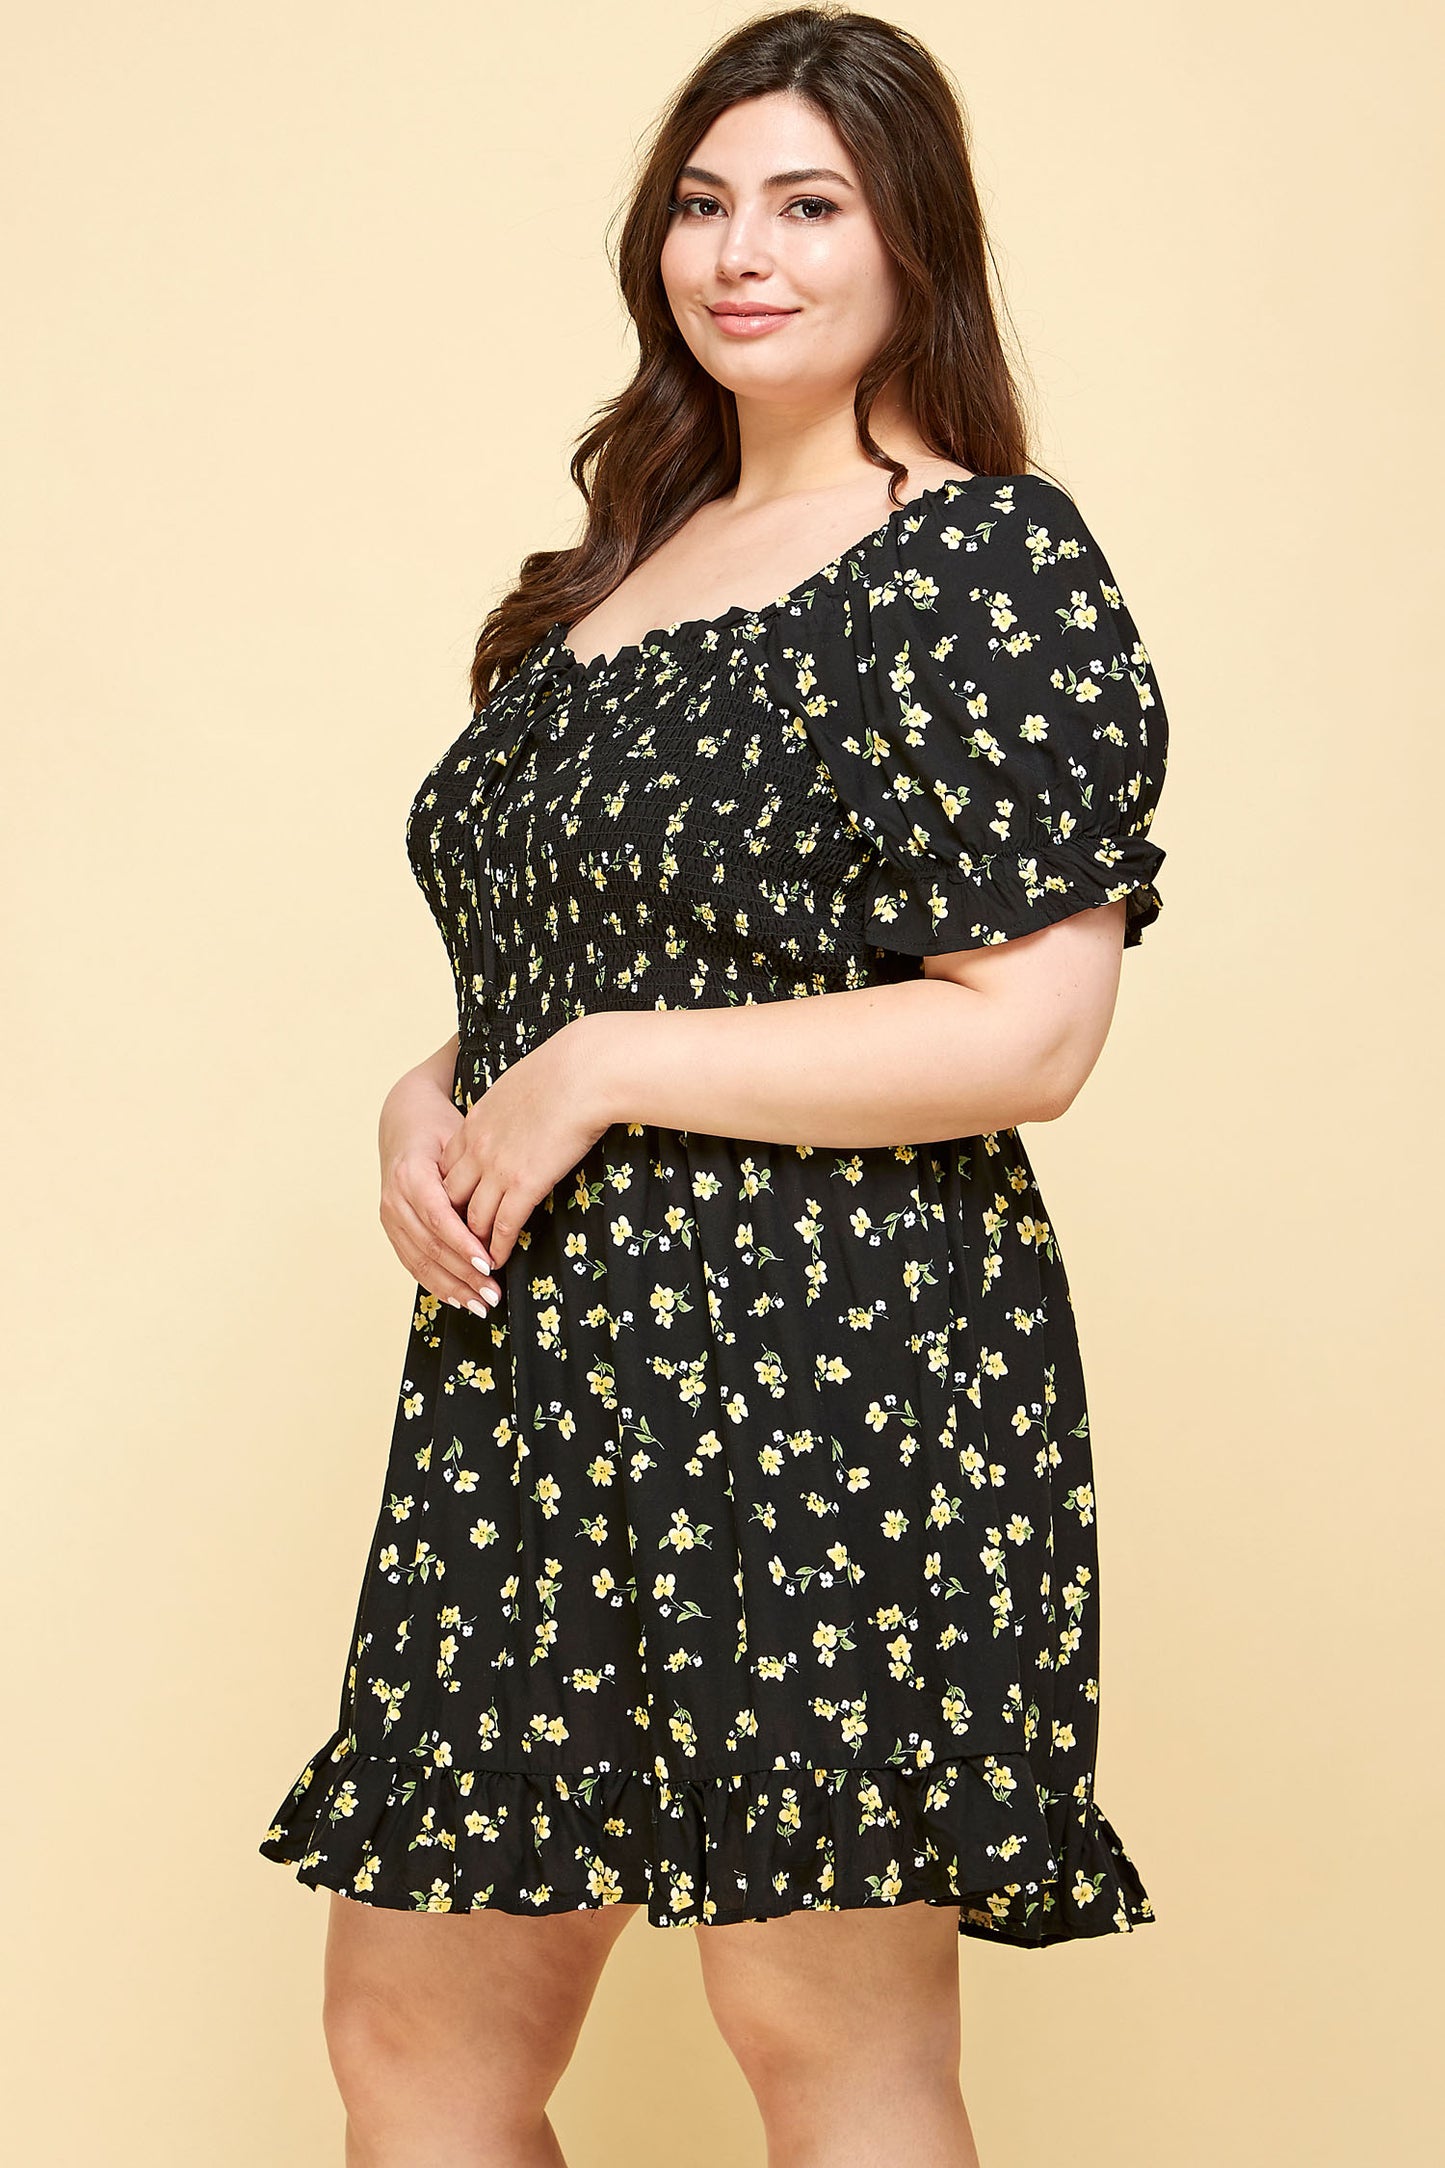 PLUS SIZE FLORAL BABYDOLL DRESS IN BLACK WITH YELLOW FLOWERS